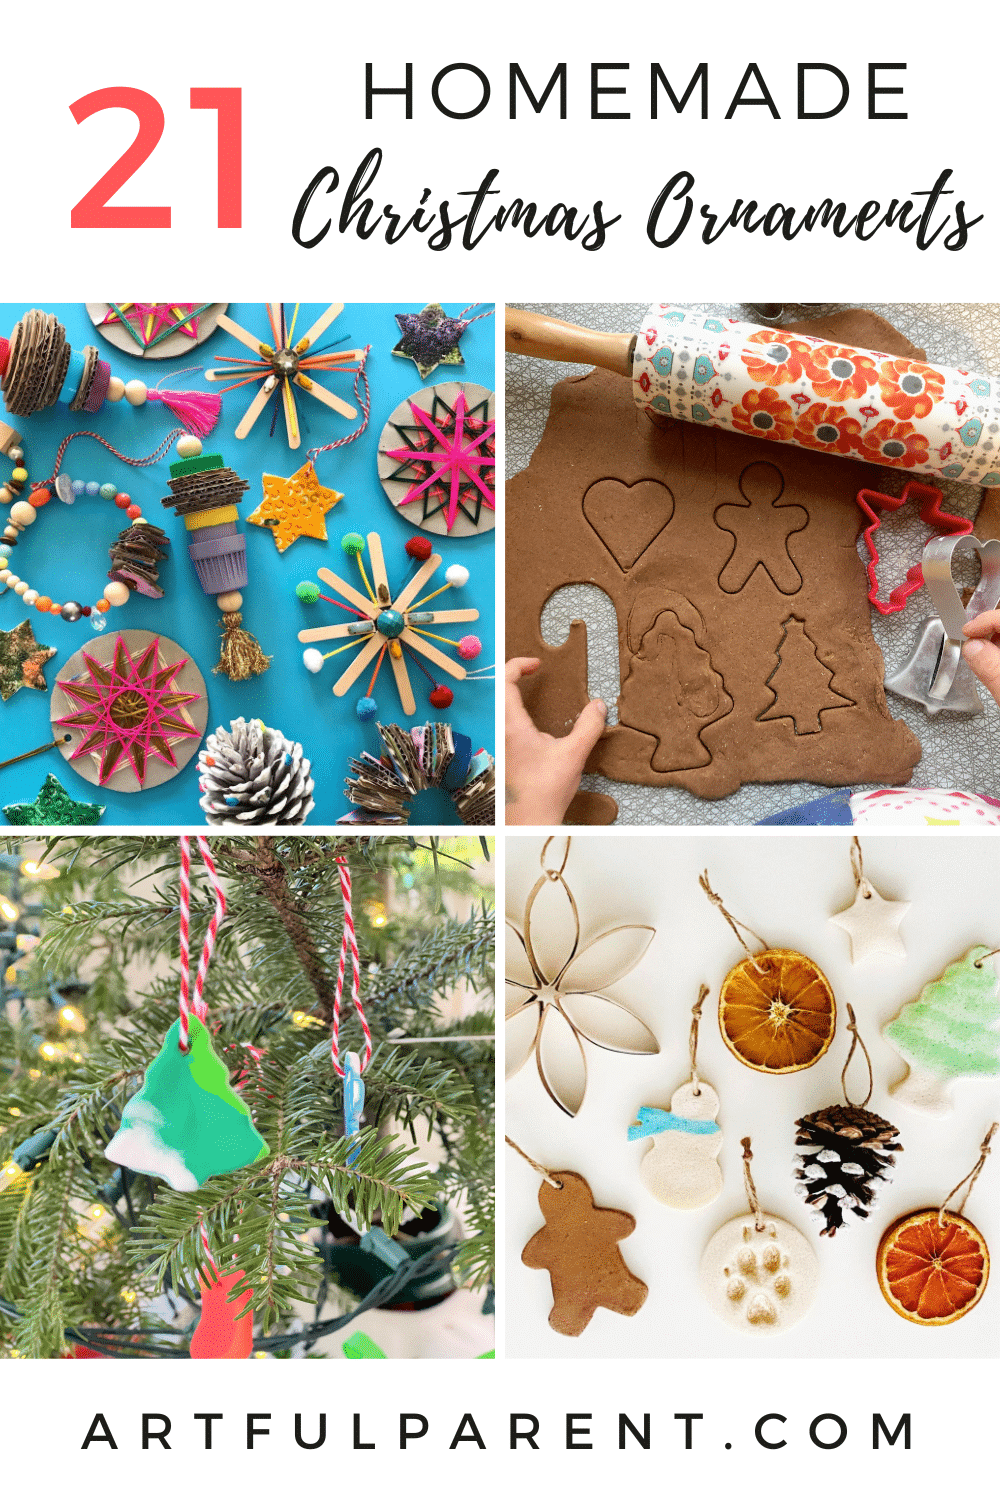 21 Homemade Christmas Ornaments + Garlands for Your Family